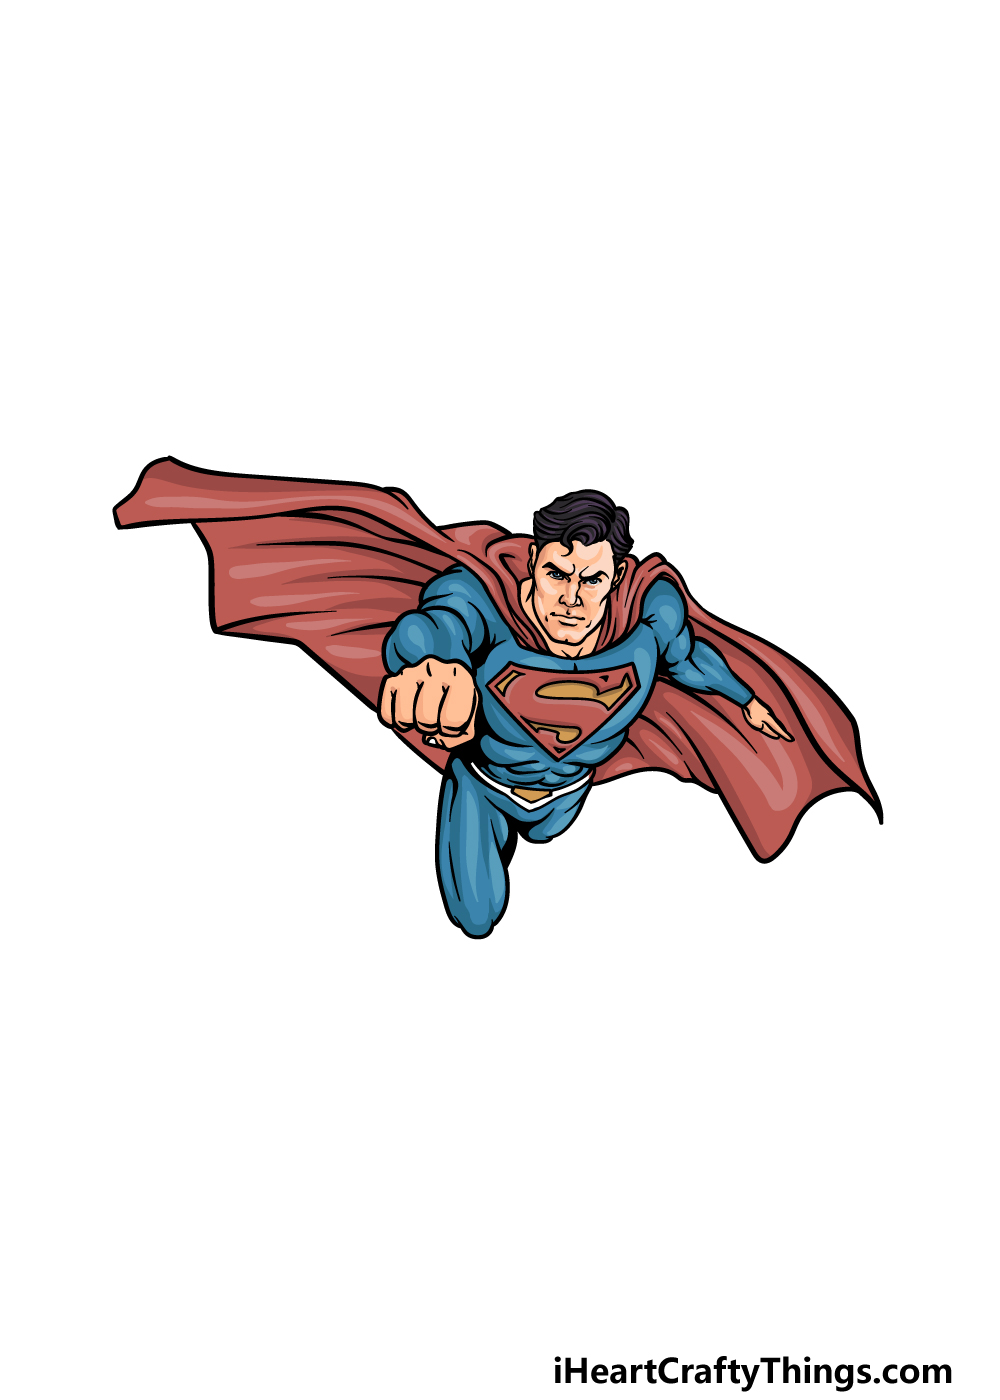 Flying Superman Drawing - YouTube